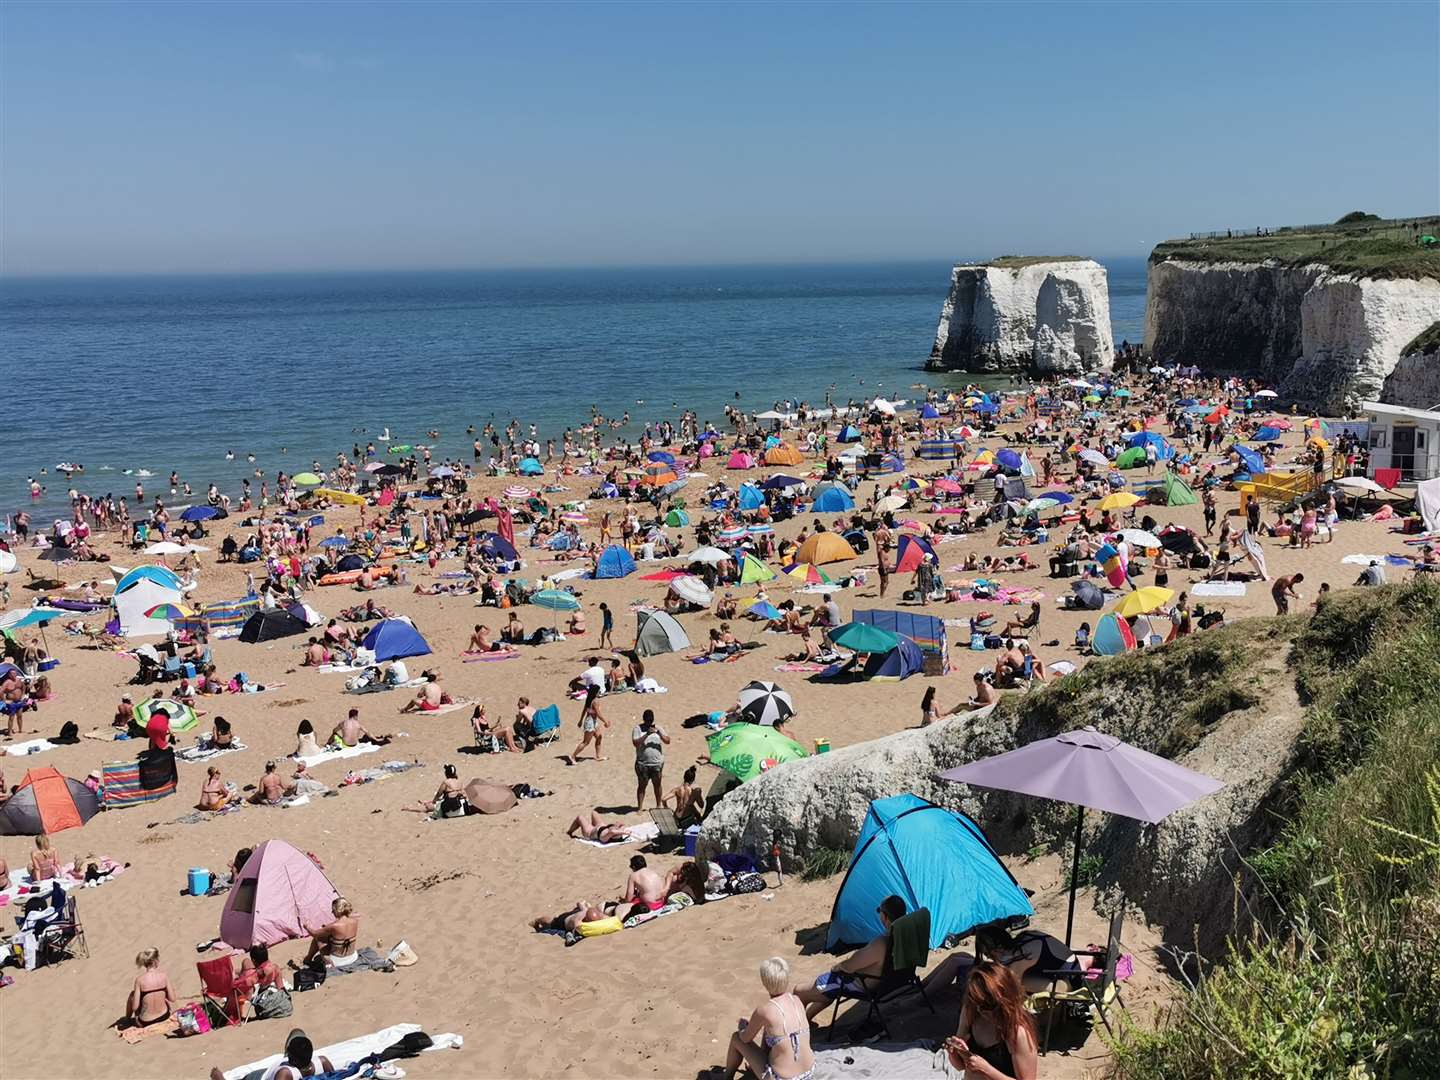 Botany Bay was also packed in June amid hot weather